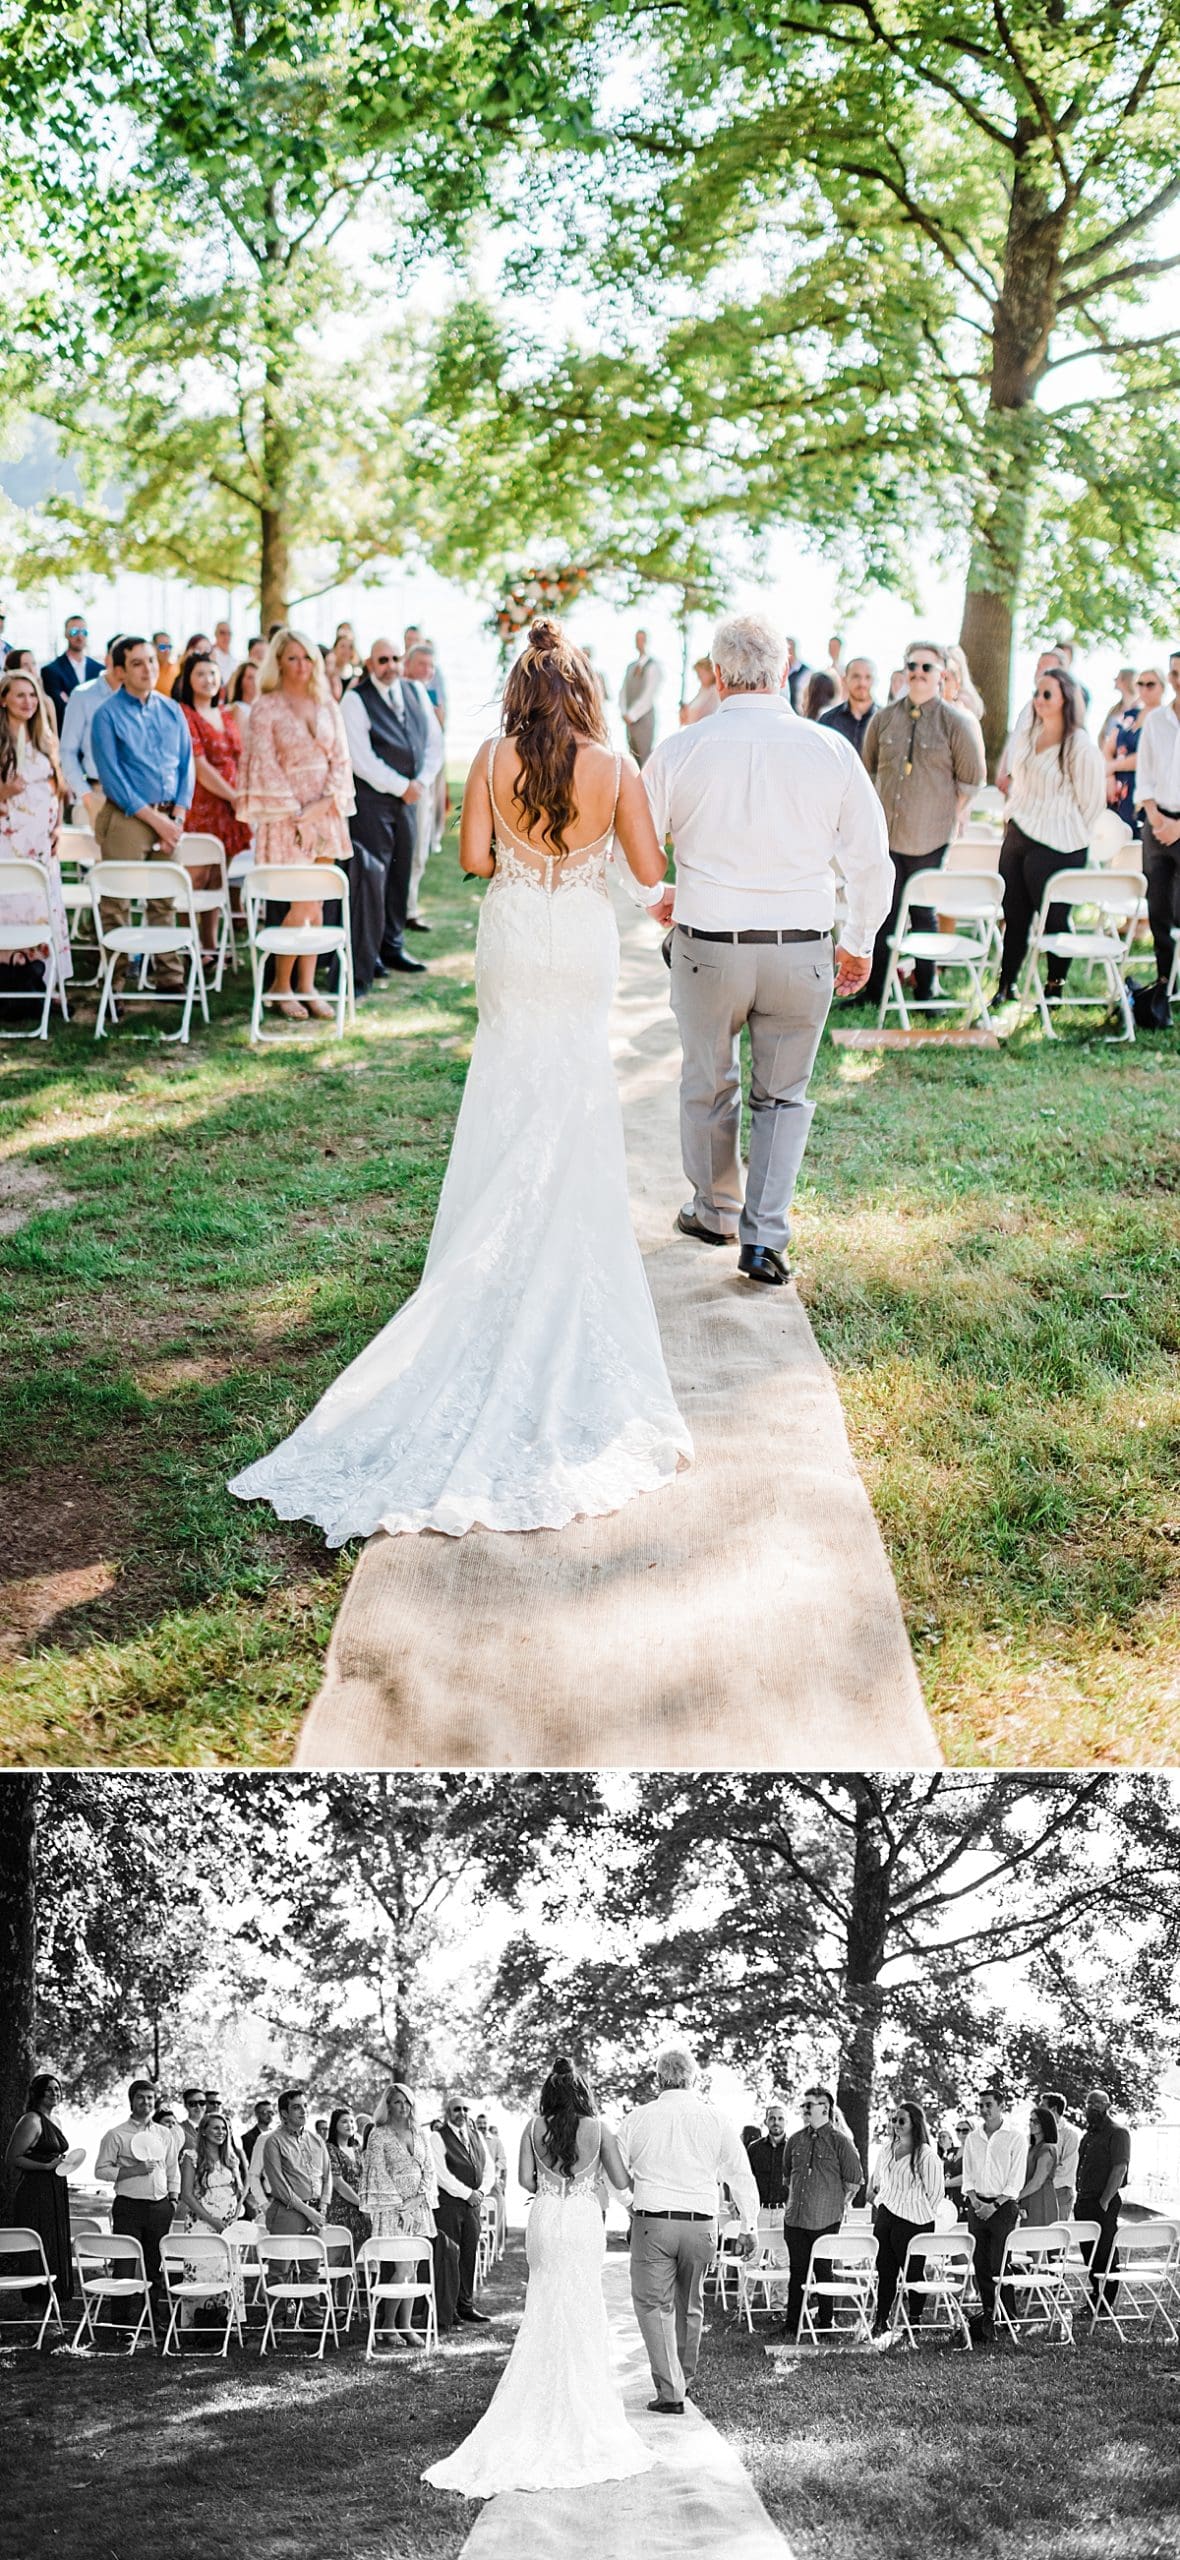 bride getting walked down the aisle by father at backyard wedding at a lake house